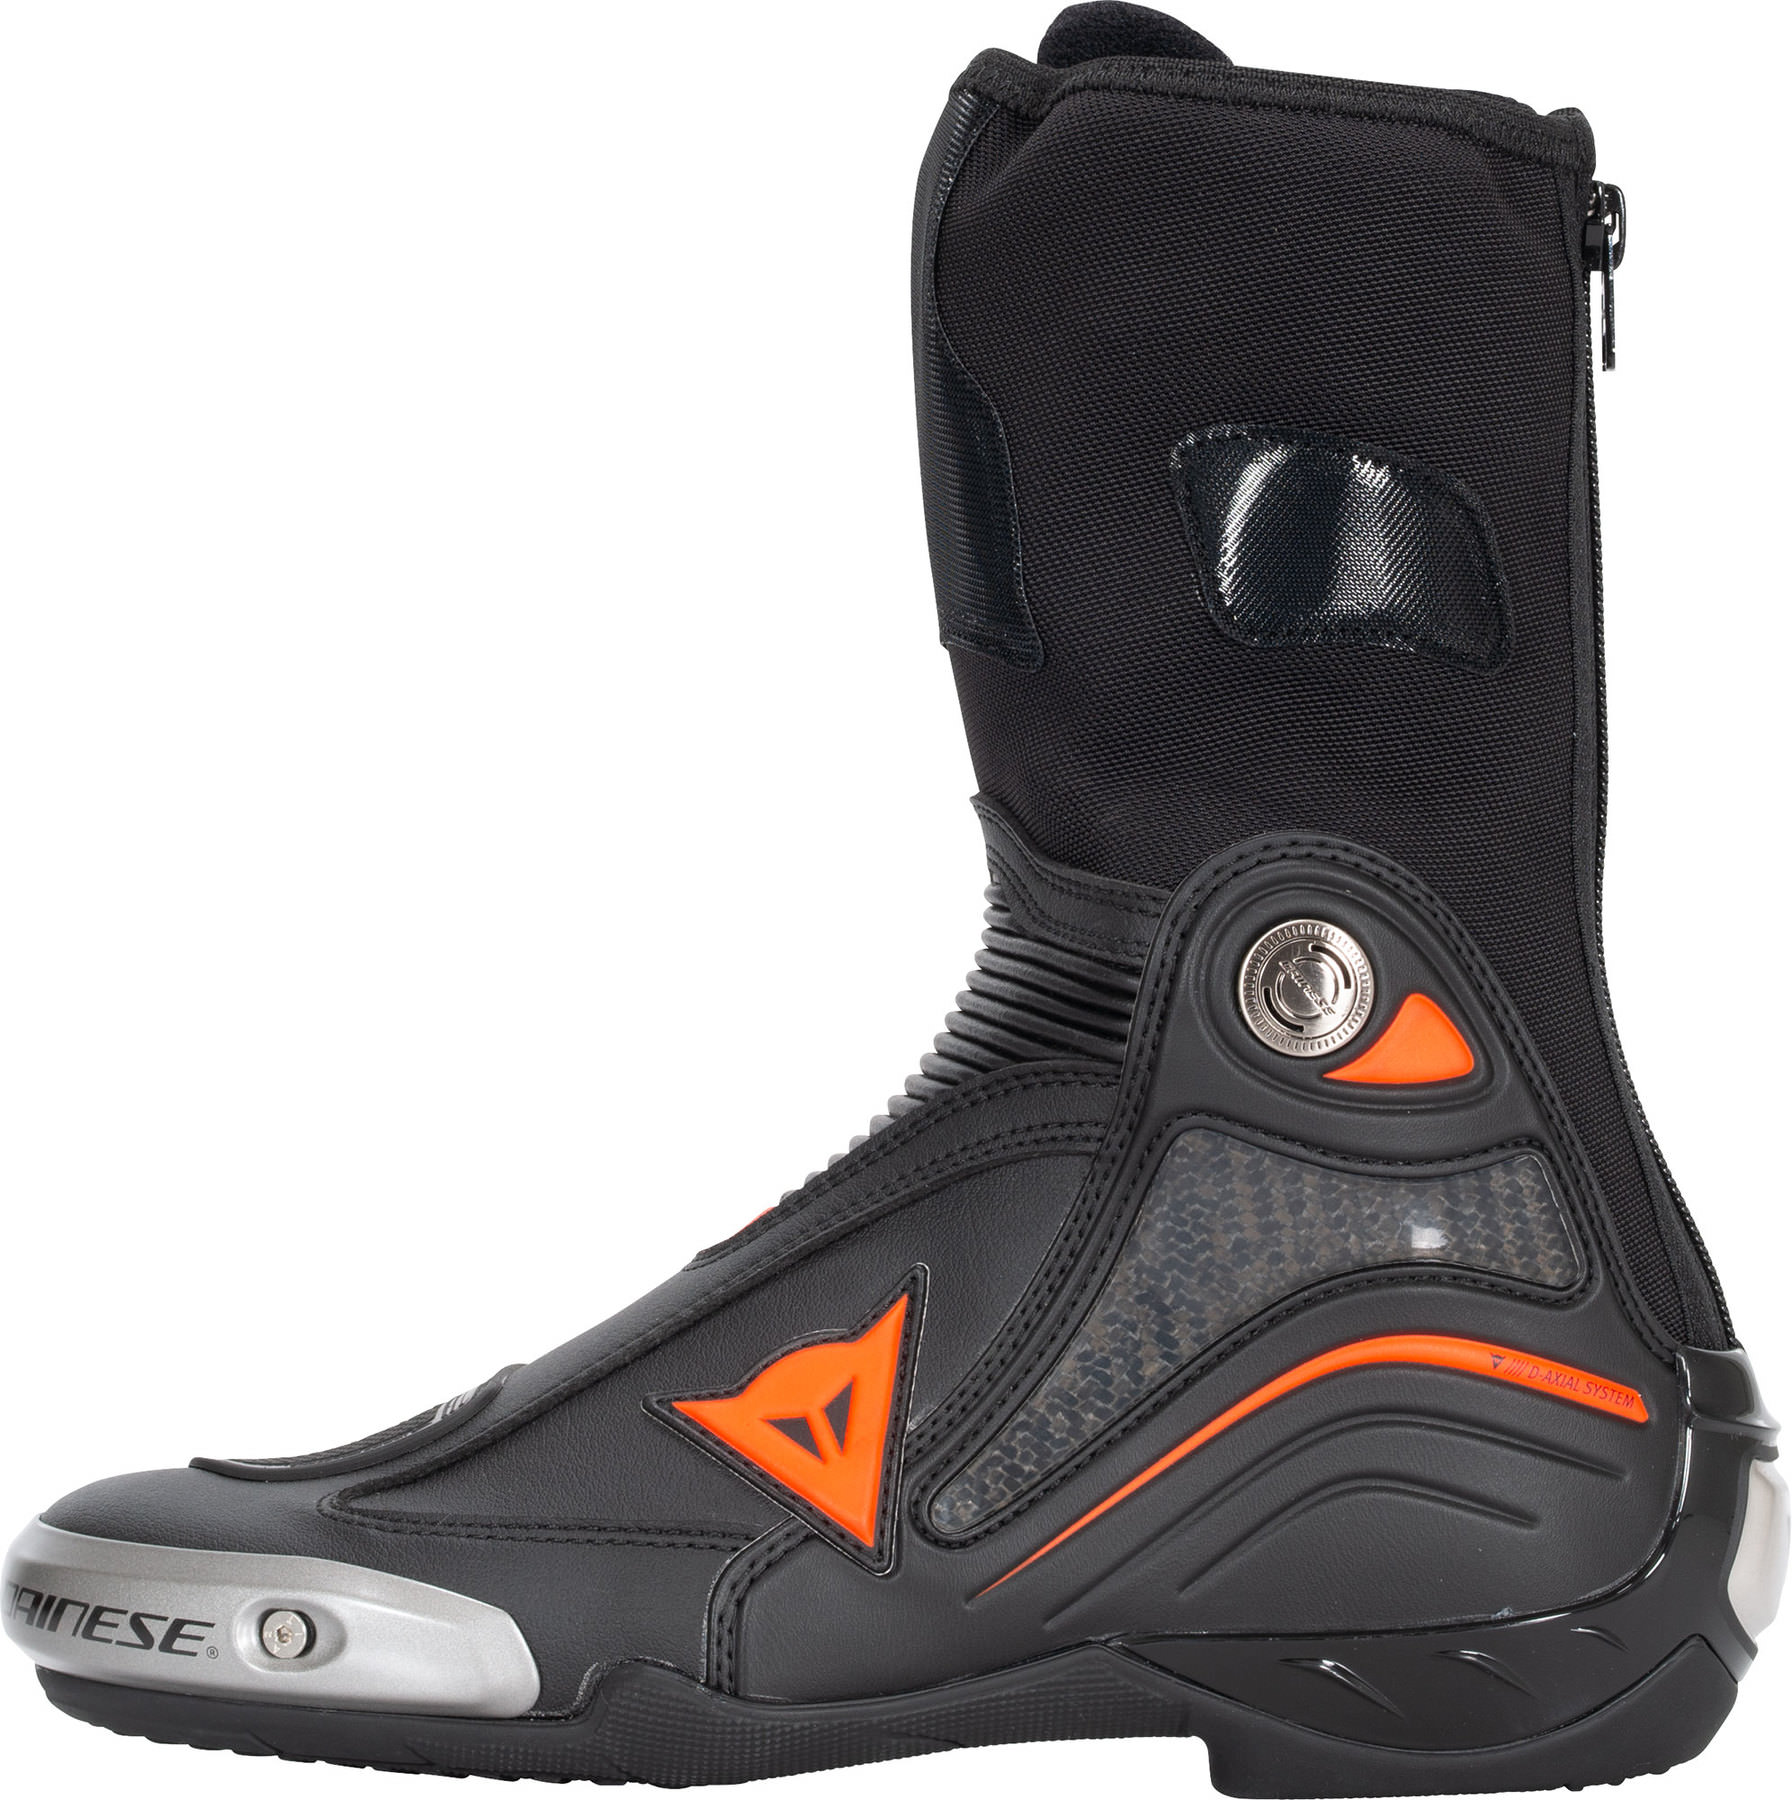 Buy Dainese Axial D1 boot | Louis motorcycle clothing and technology